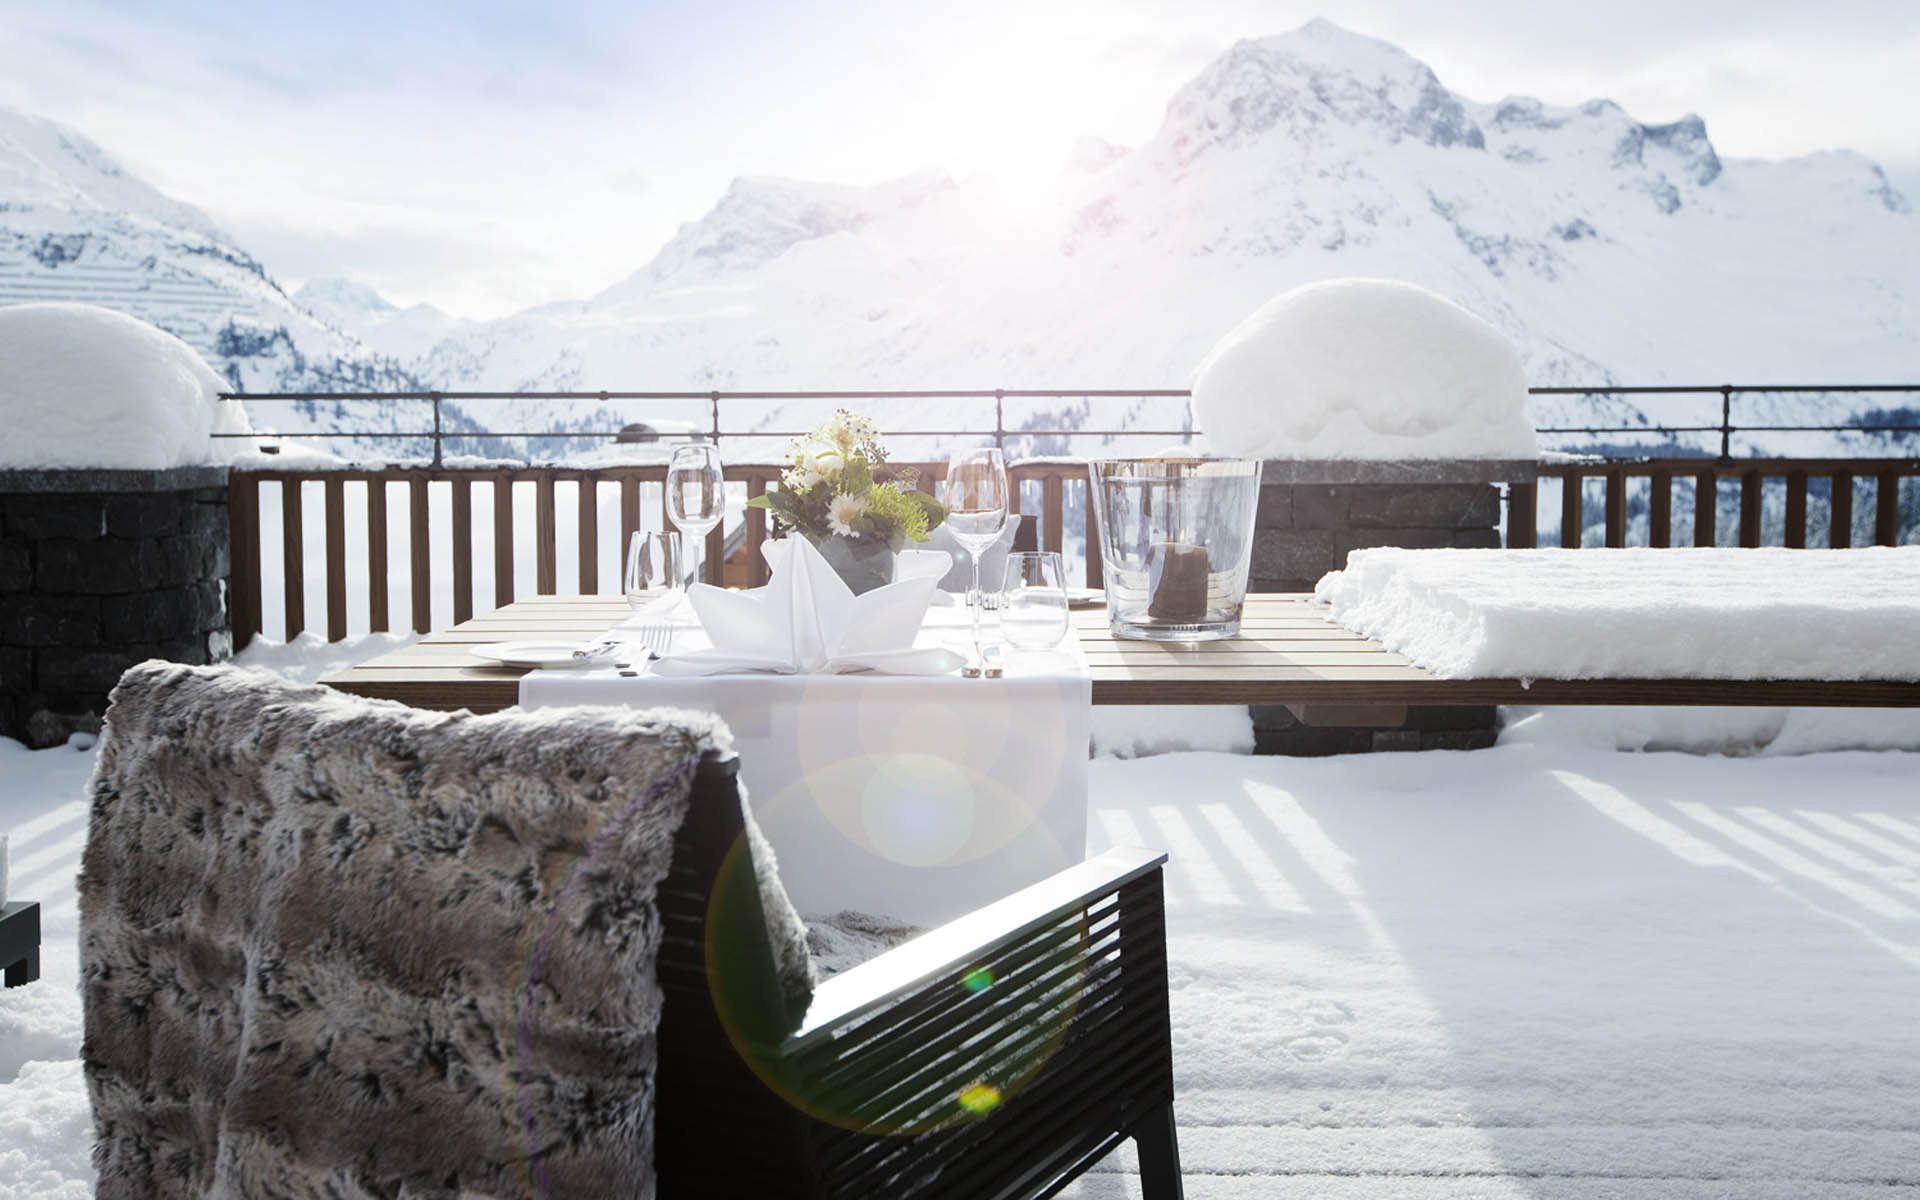 Guide: How to find the perfect luxury villa or ski chalet?